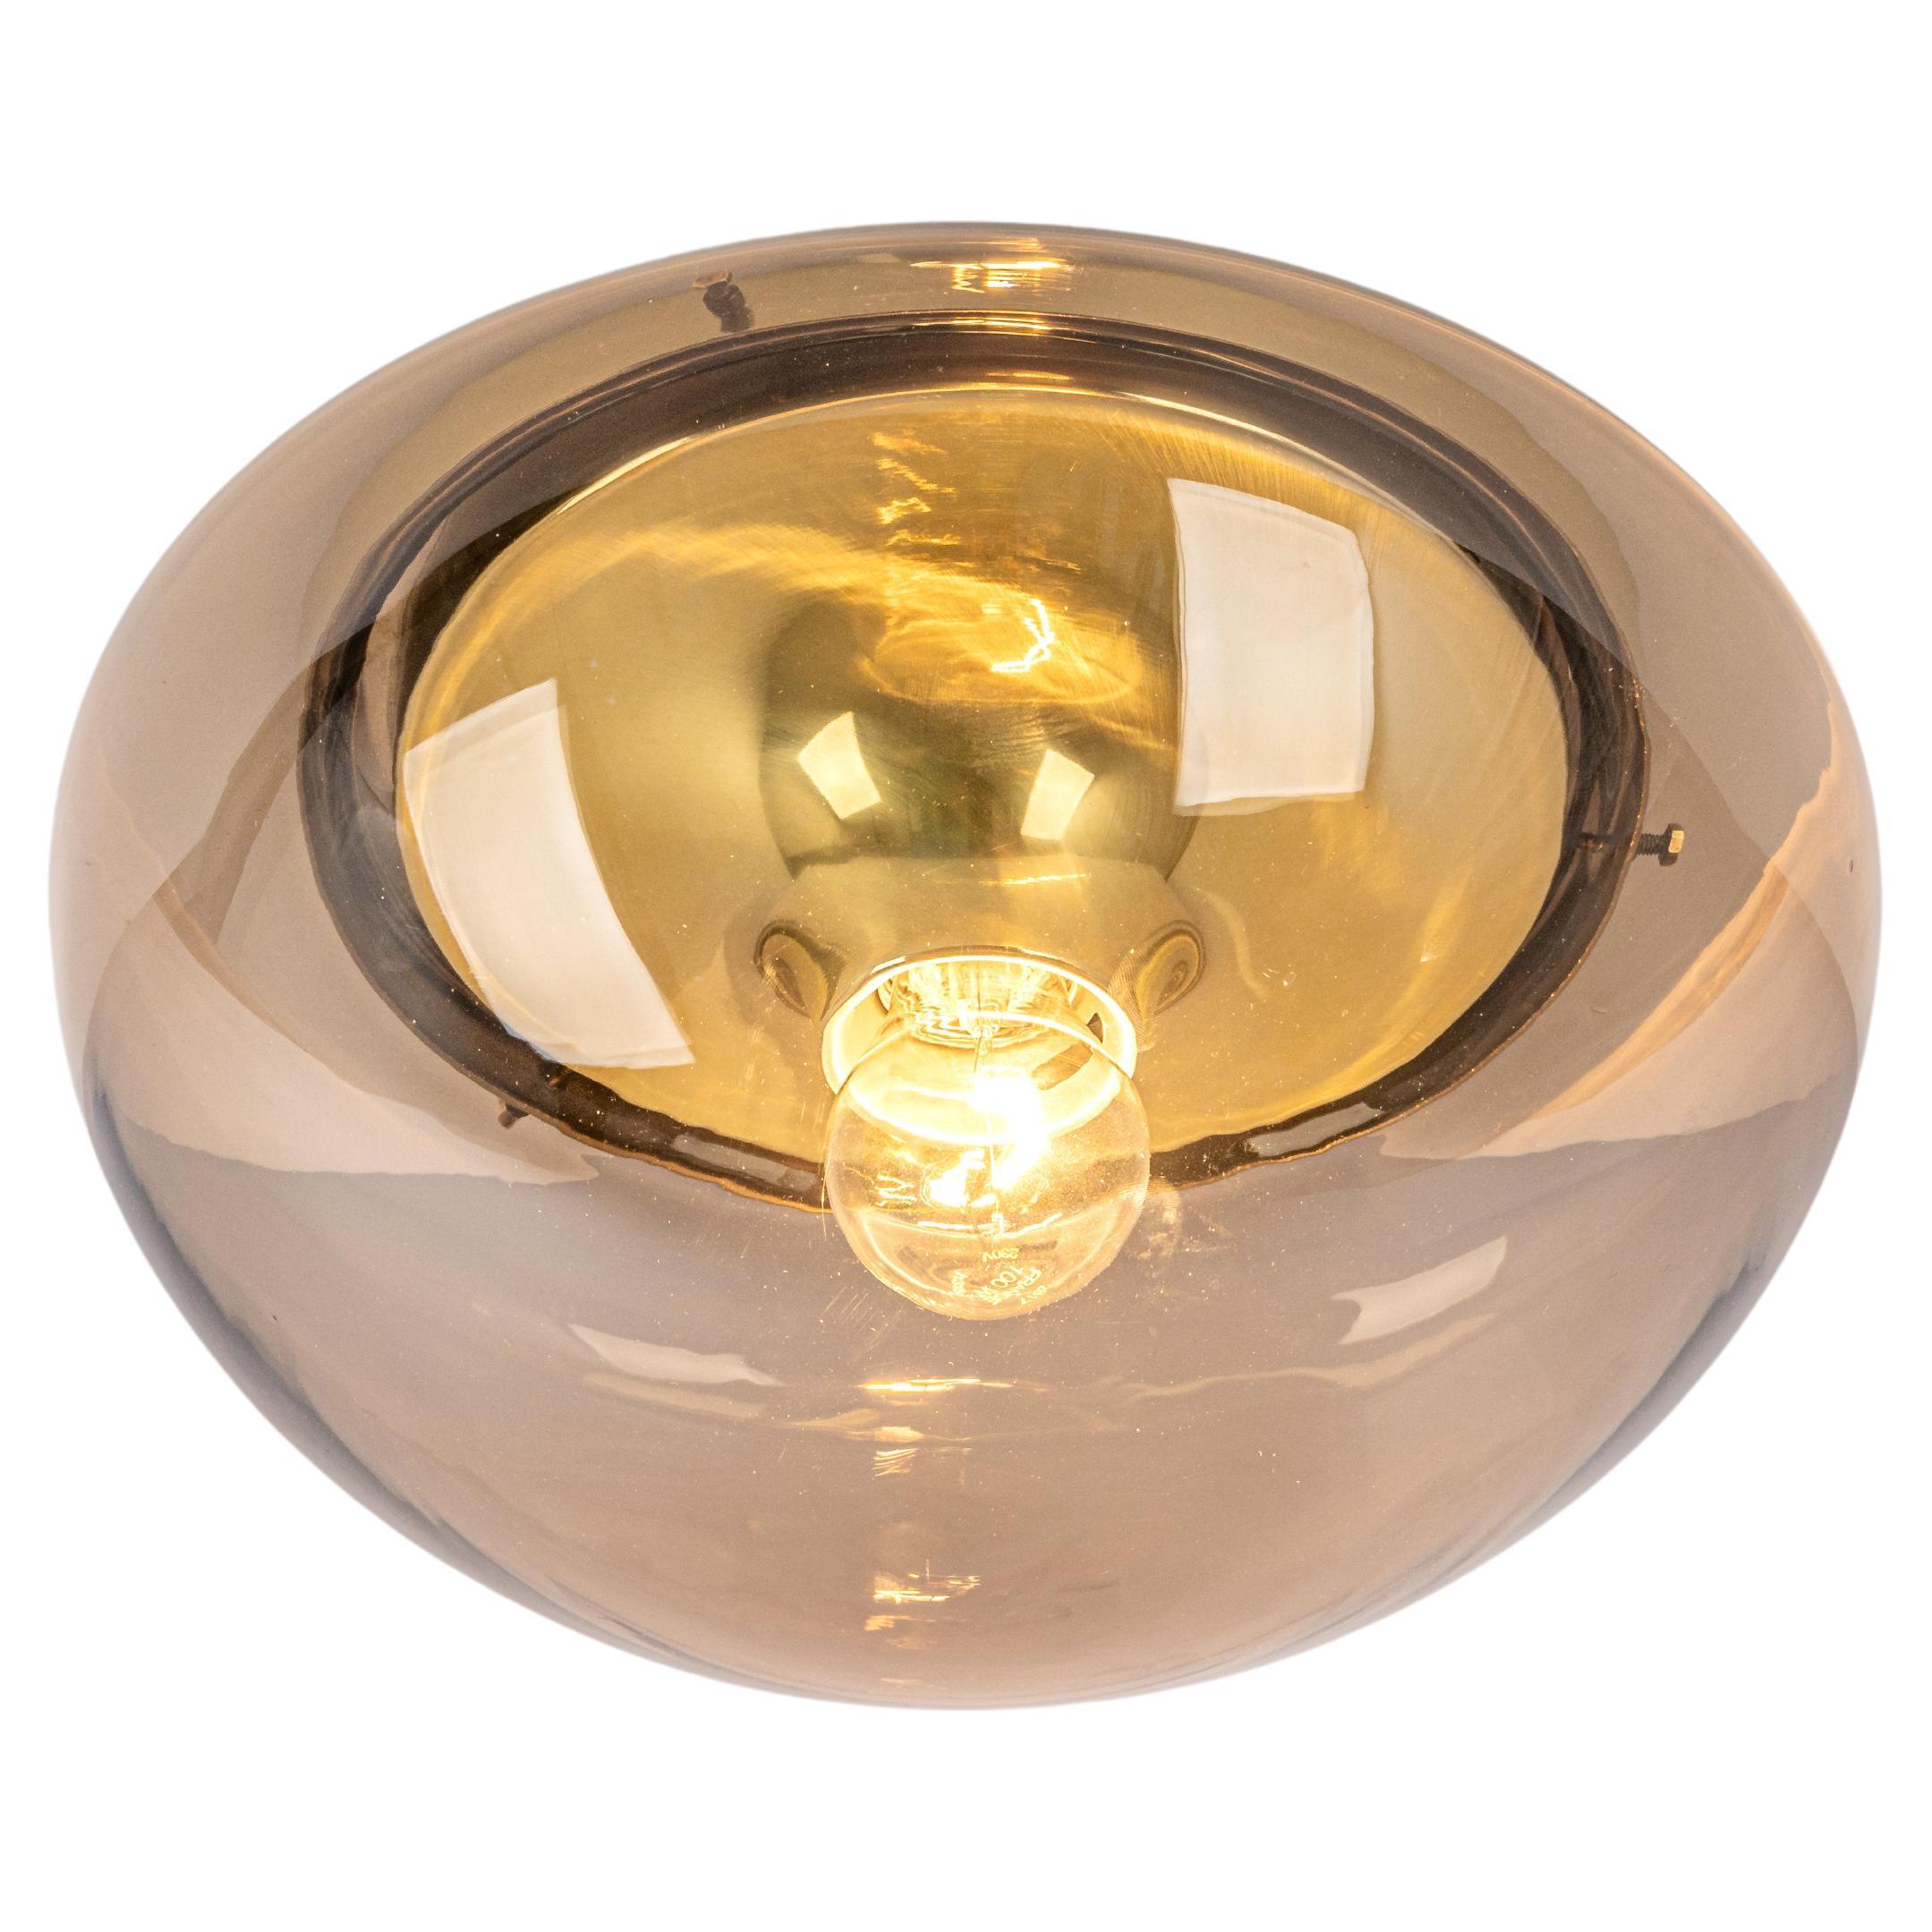 1 of 2  round glass flush mount with smoked glass by Limburg, Germany, 1970s.
Smoked glass fixtured on a brass base.

Good condition. Cleaned, well-wired and ready to use. 

The fixture requires 1 x E27 Standard bulbs with 60W max each 
Light bulbs